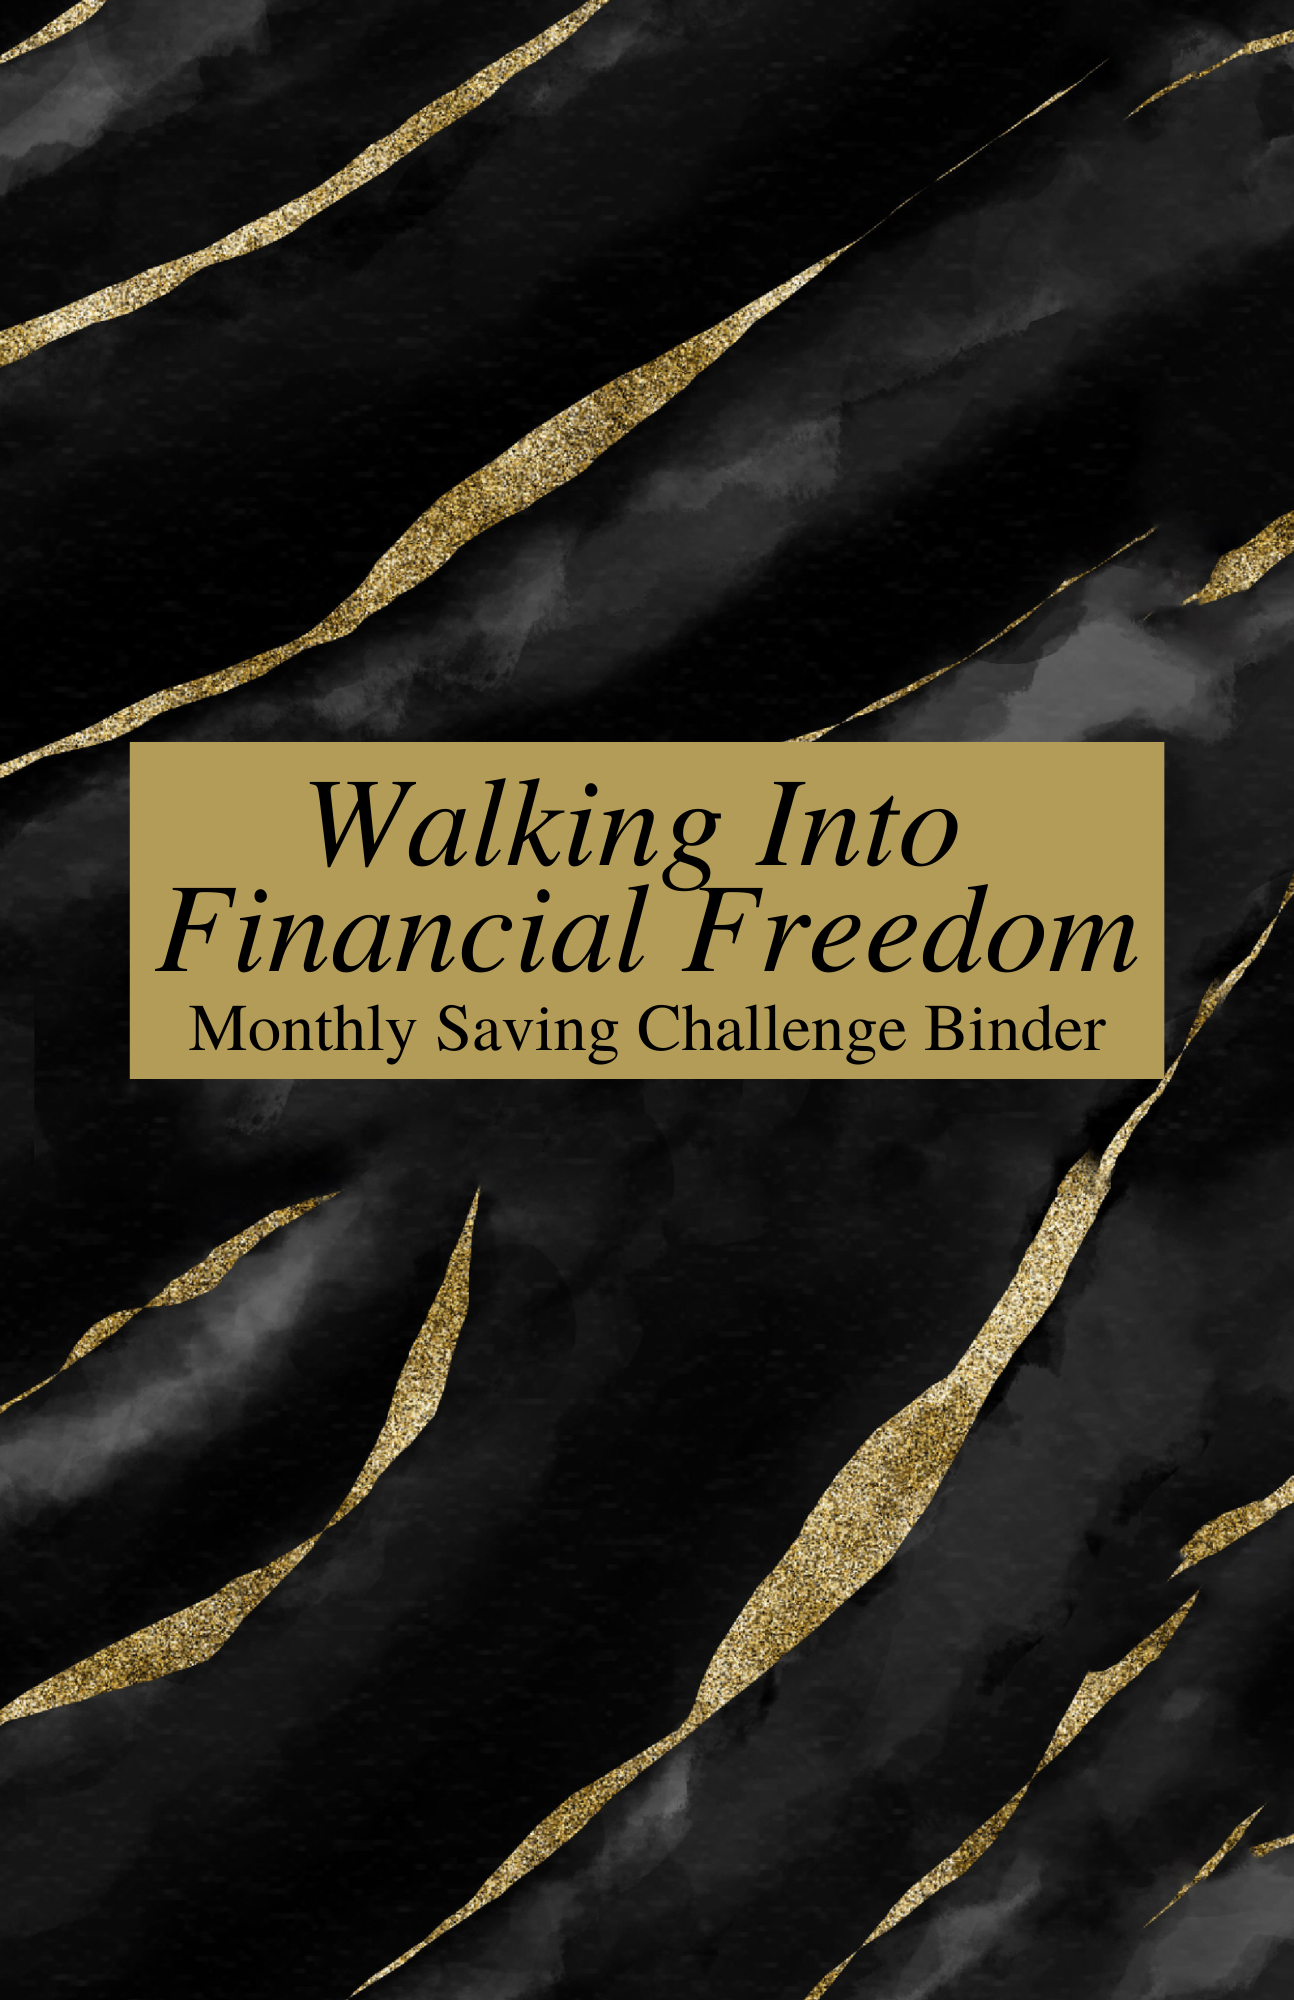 Customized Walking Into Financial Freedom - Monthly Saving Challenge Binder